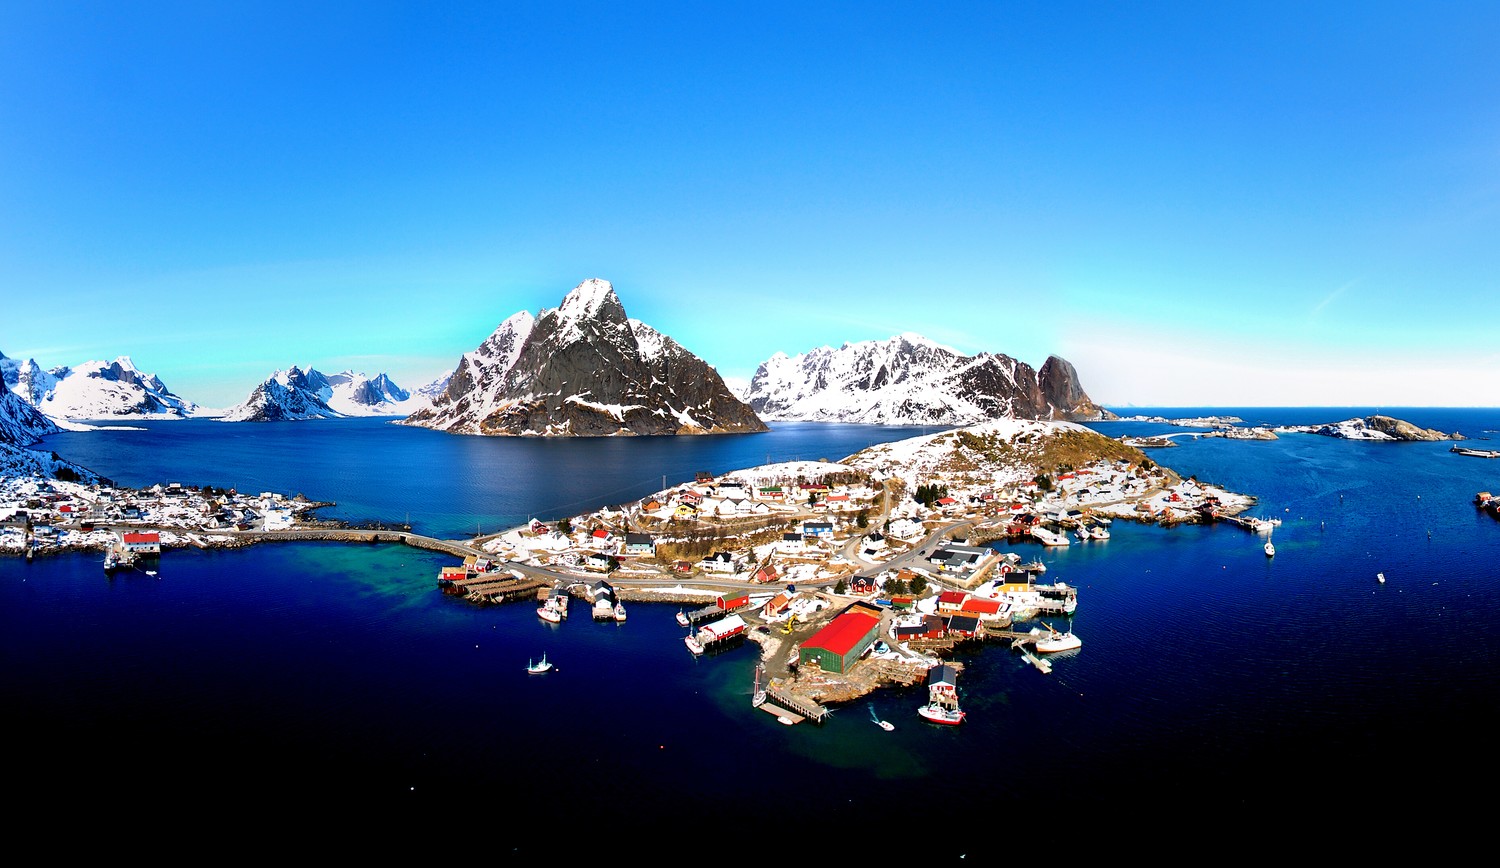 The town of Reine on the island of Moskenesøya. (Making View / Visit Norway)